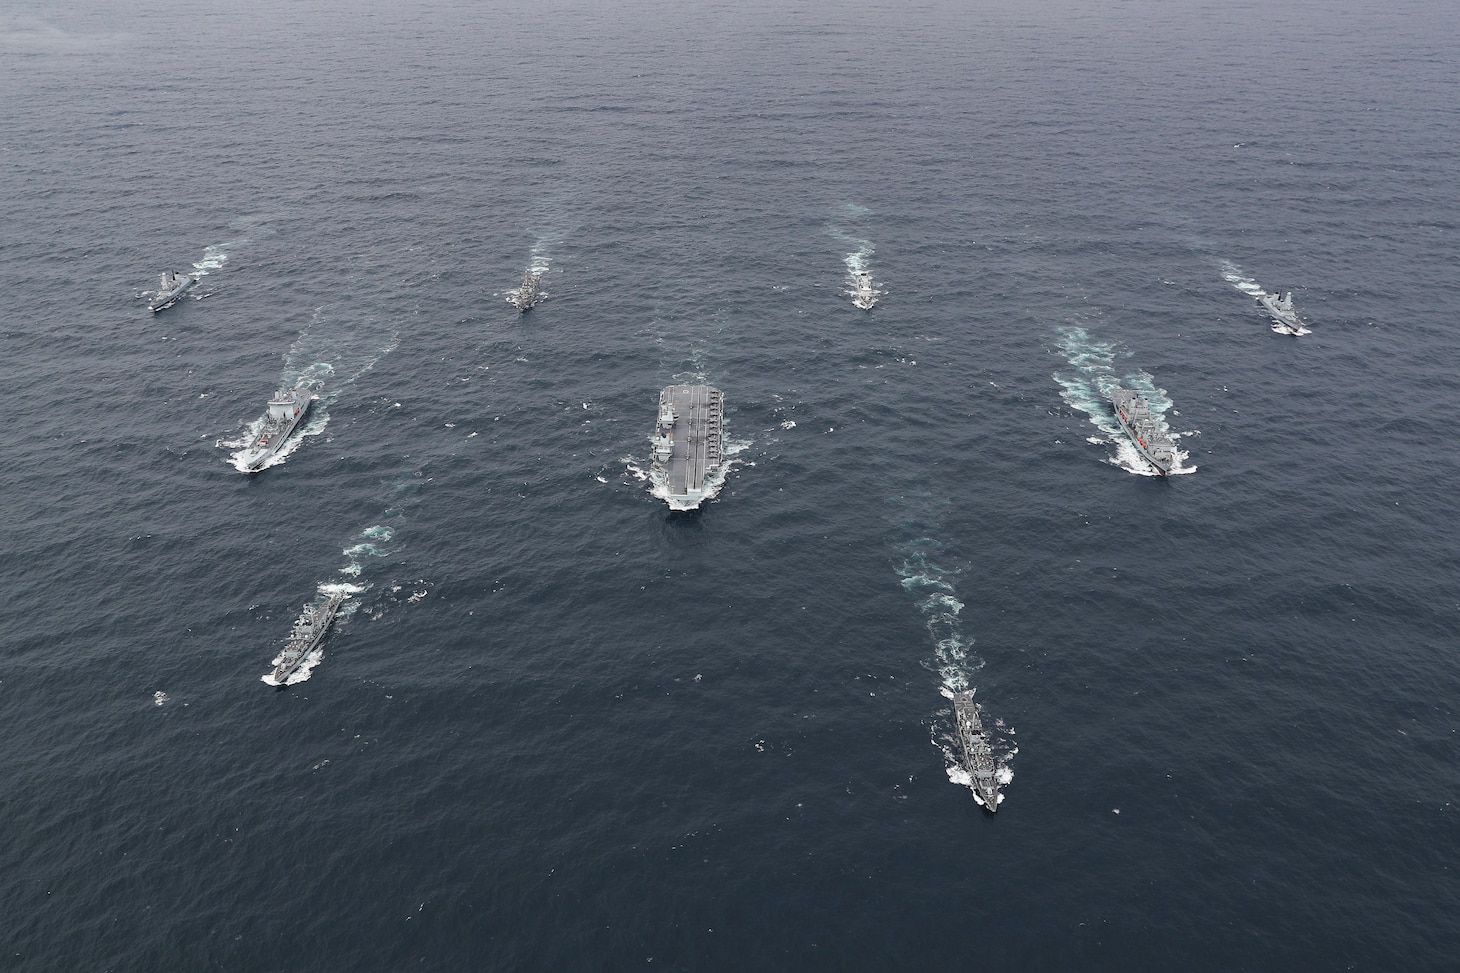 The full United Kingdom (UK) Carrier Strike Group (CSG) sails in formation for a photo exercise (PHOTOEX).